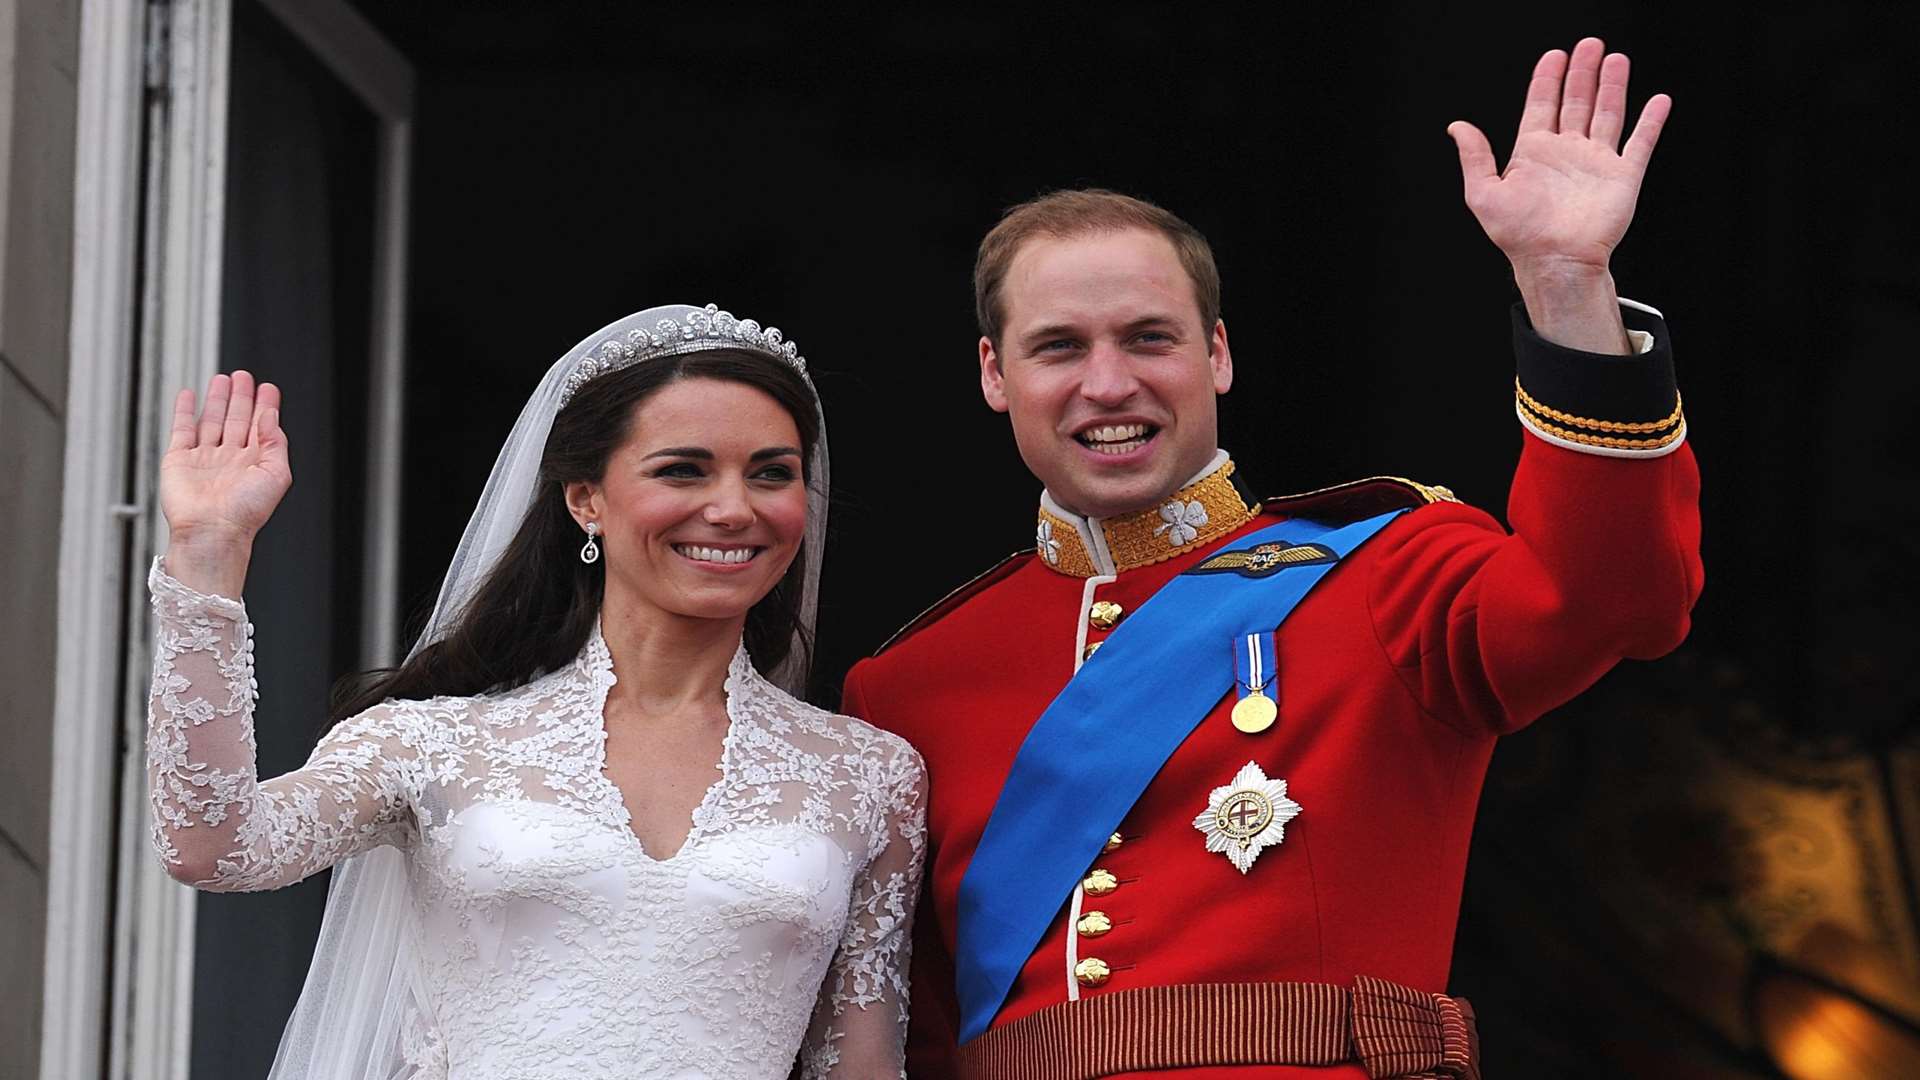 Prince William and Kate Middleton on their wedding day. Picture - John Stillwell